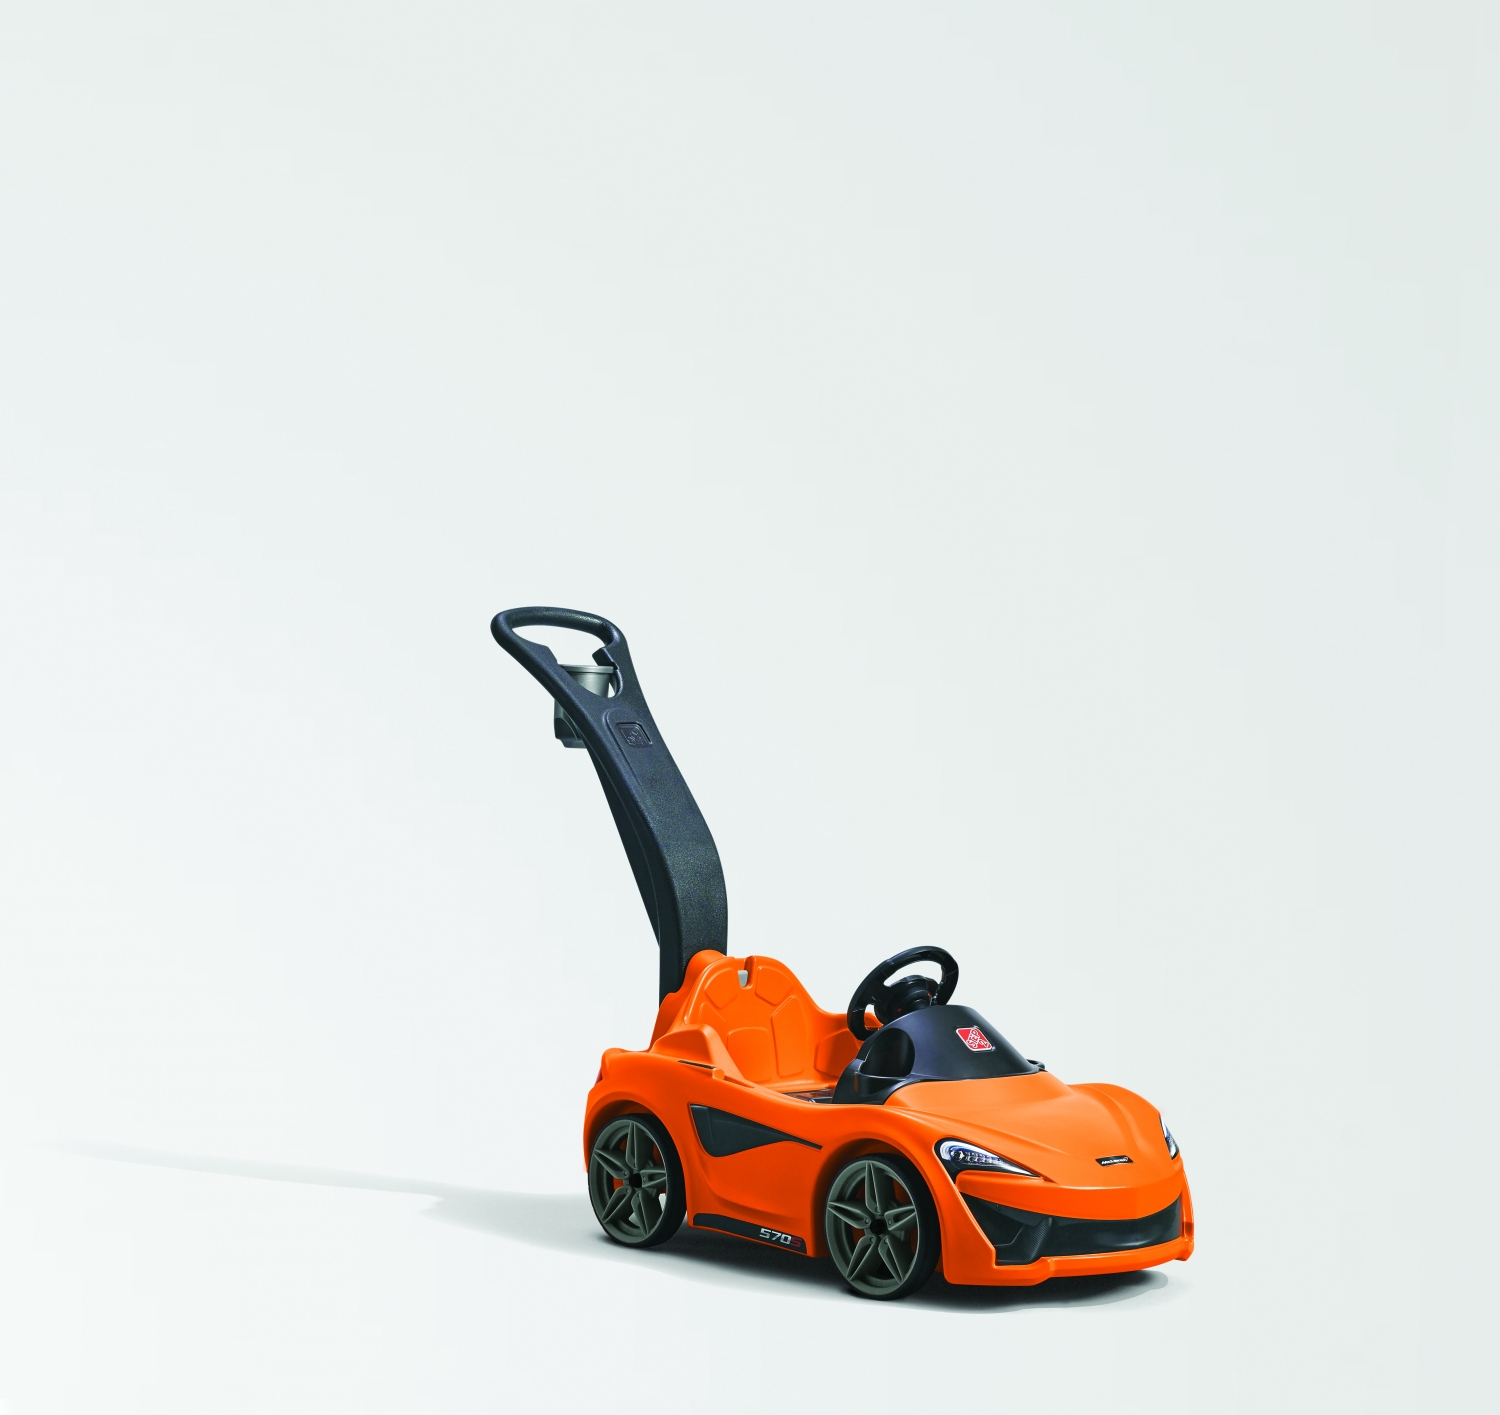 McLaren Automotive takes a new approach to open-top cars